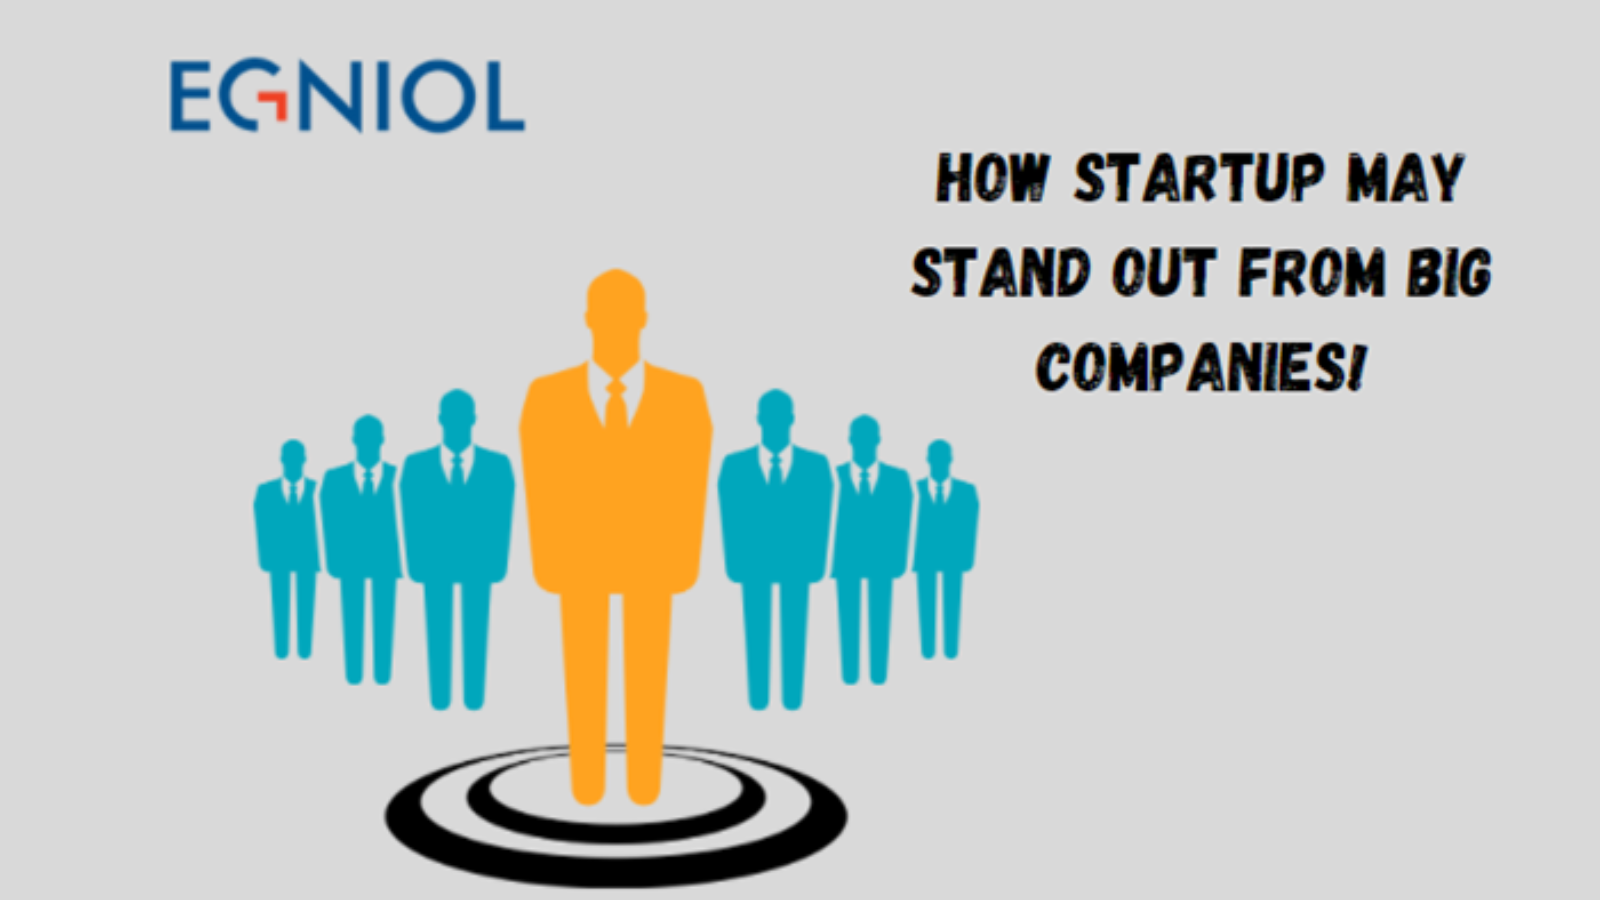 How Startup may stand out from Big Companies! - By Egniol